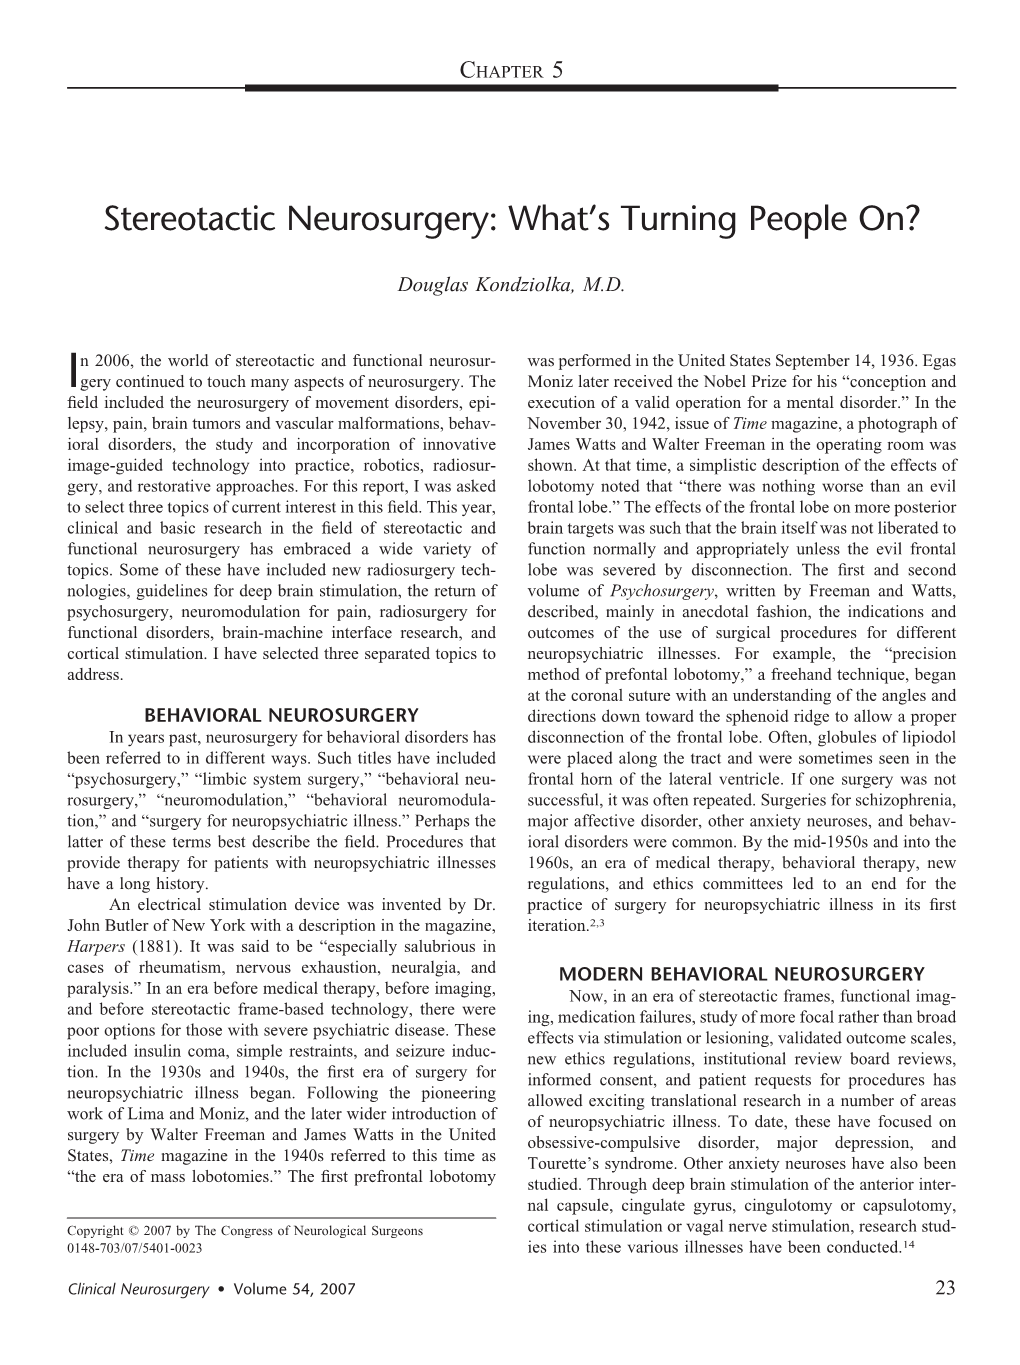 Stereotactic Neurosurgery: What’S Turning People On?